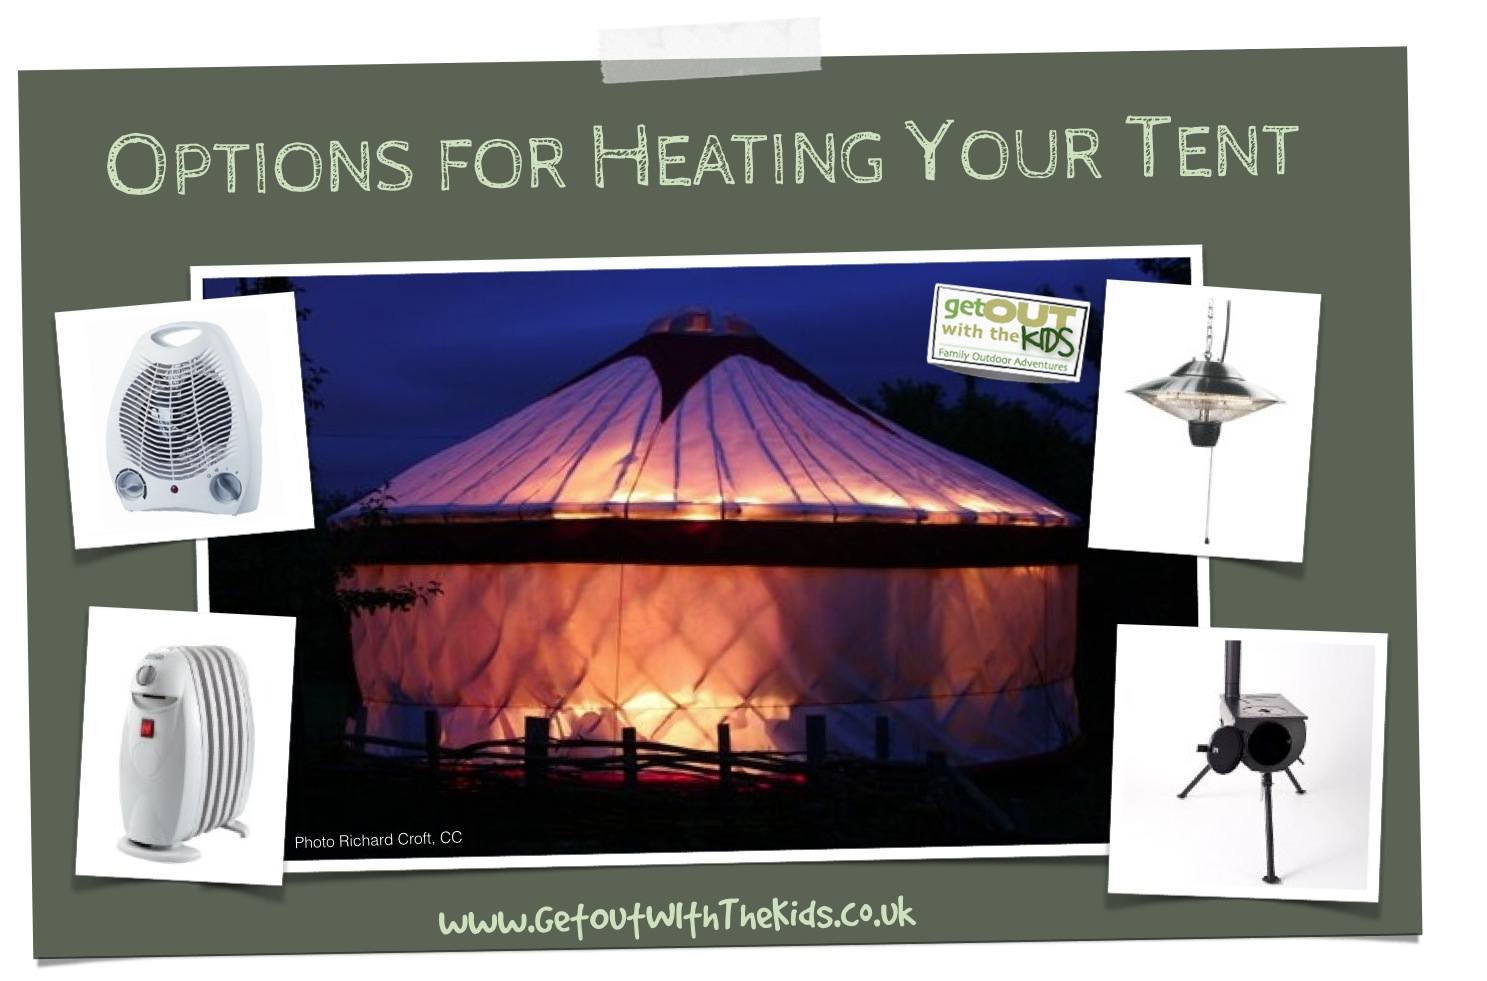 Options for Heating Your Tent - A look at tent heaters